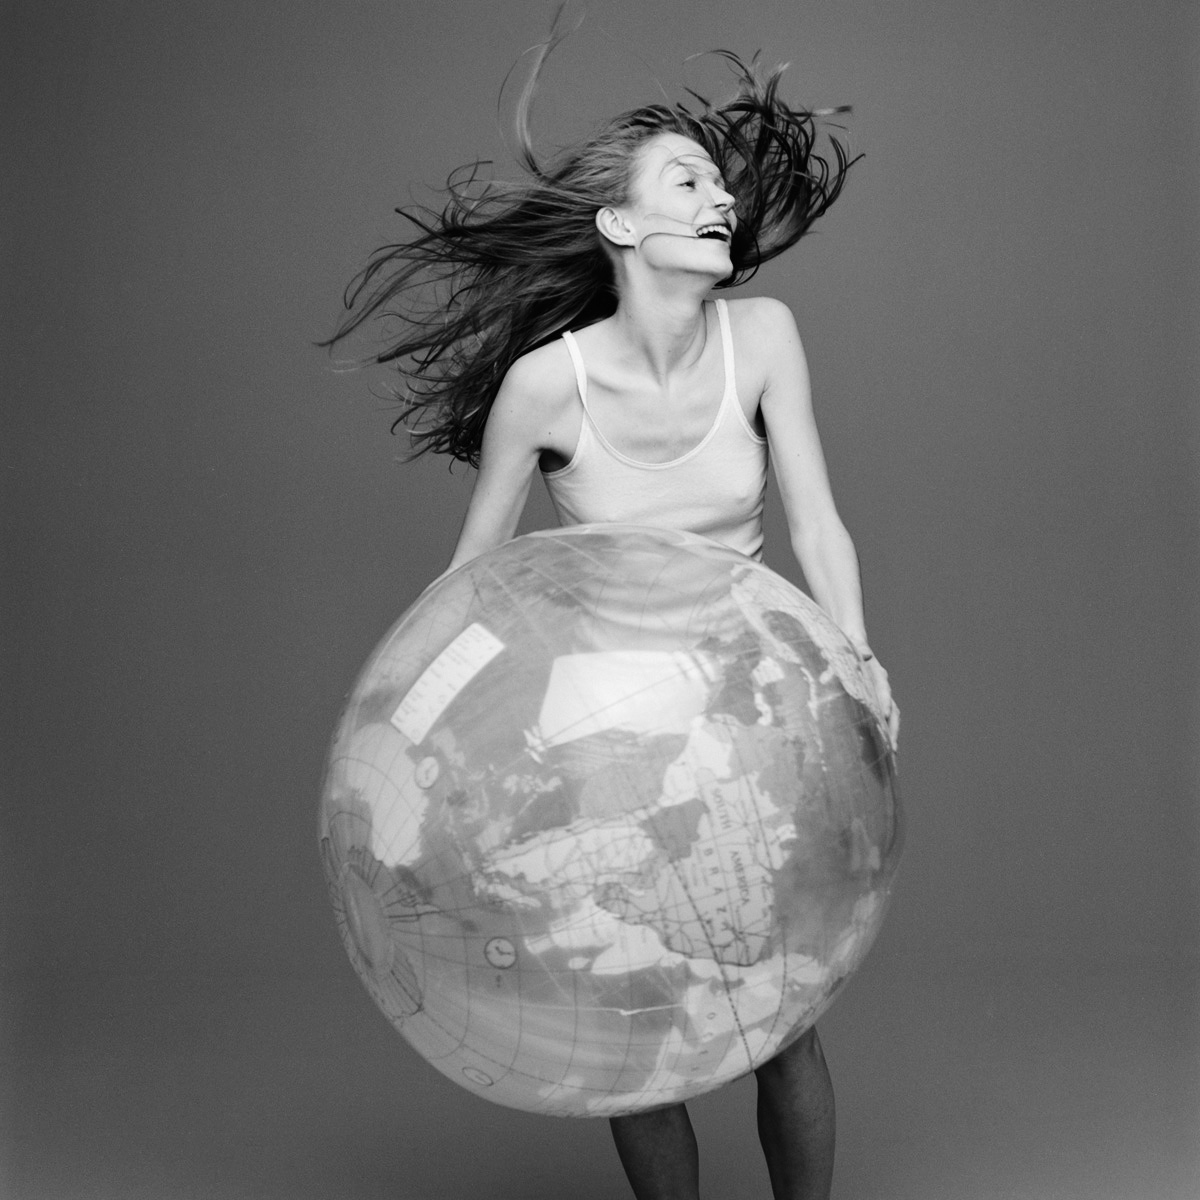 kate+moss+with+the+world+by+patrik+andersson-4.jpeg